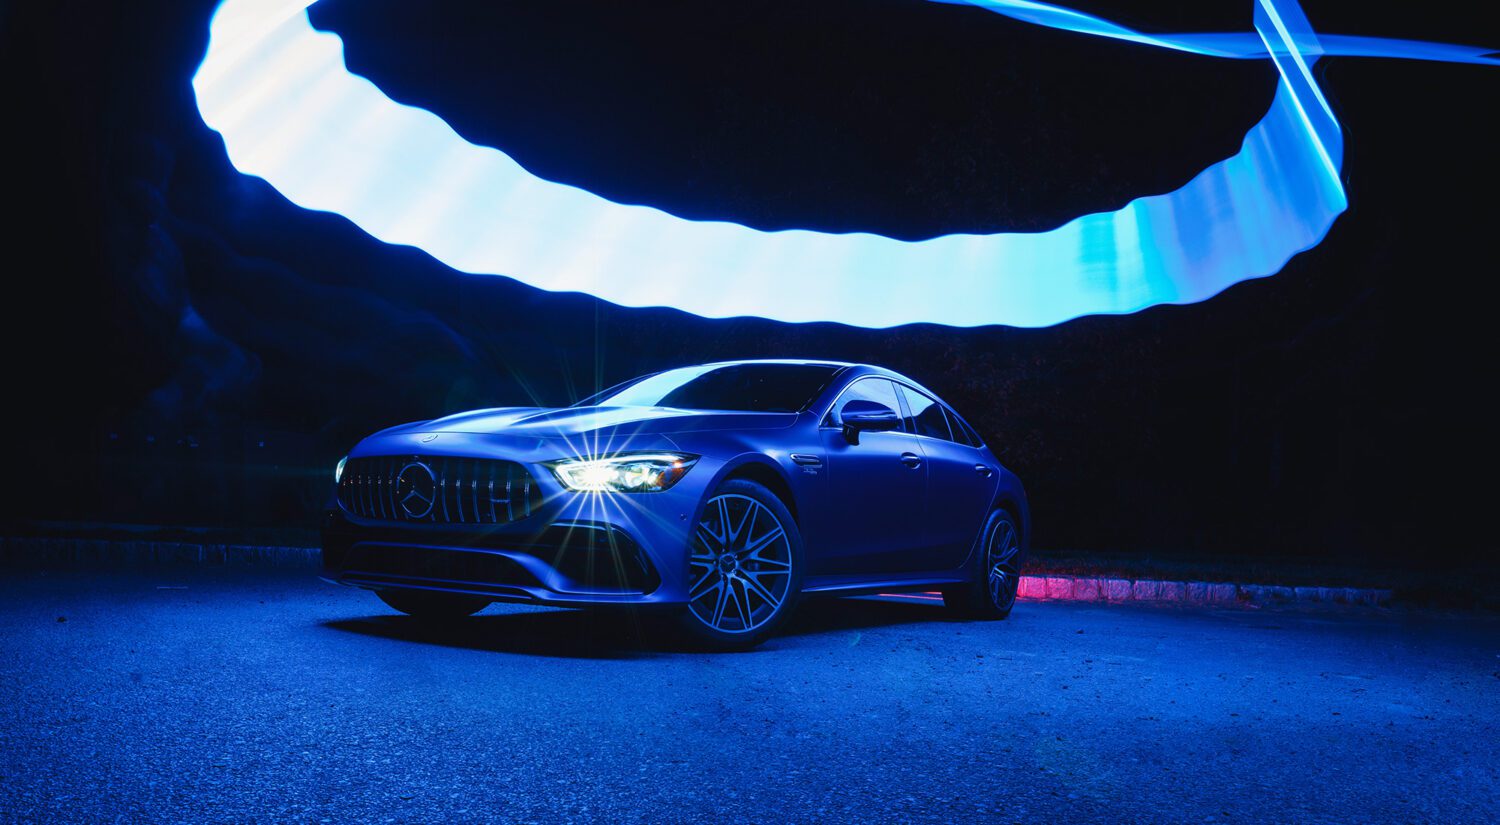 The AMG GT 53 proves you can’t be everything to everyone